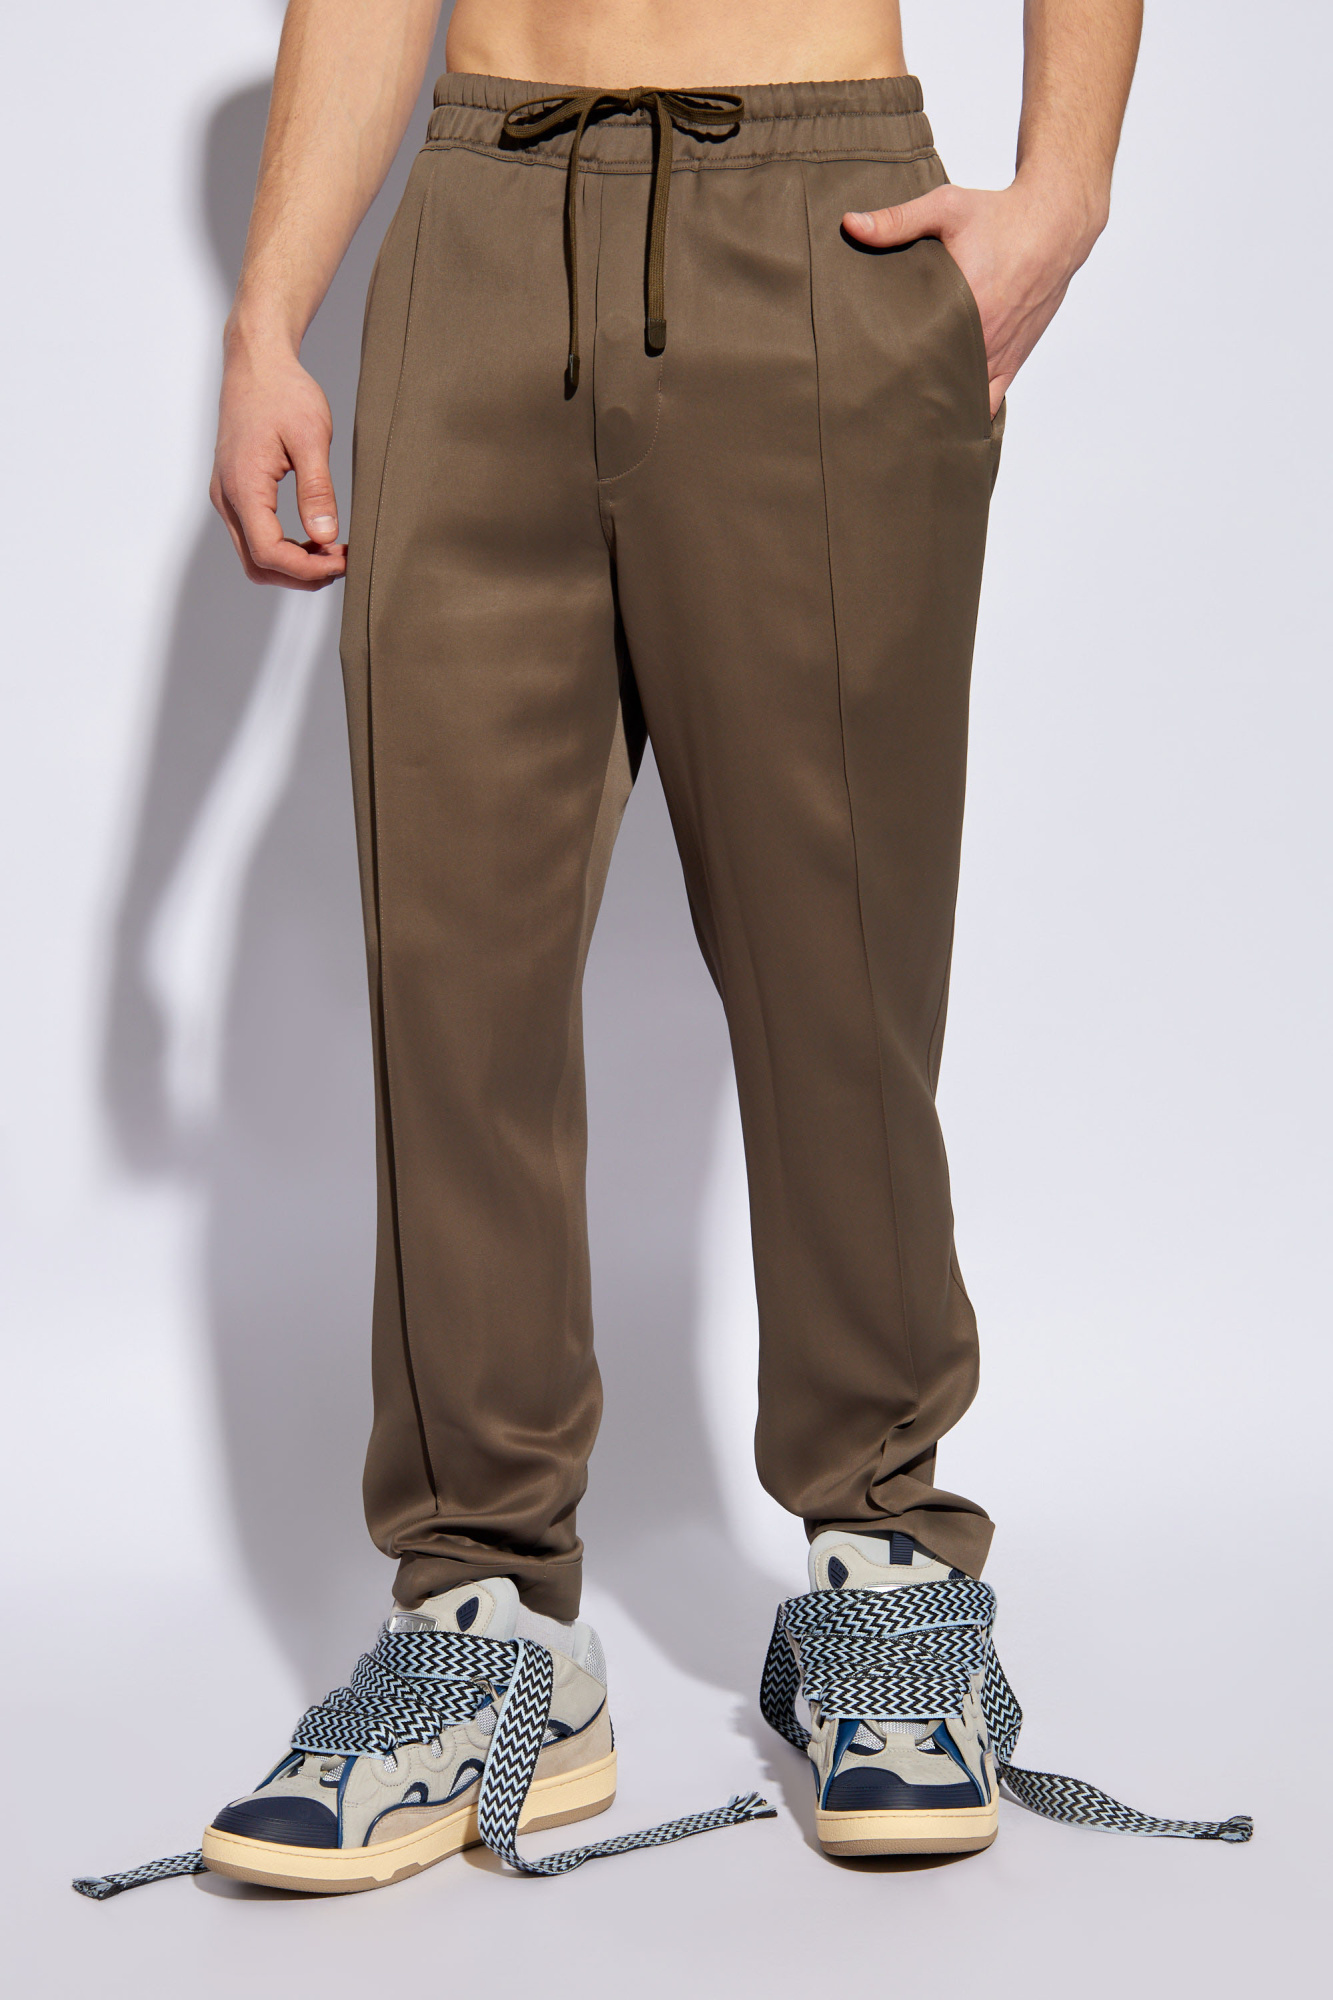 Tom Ford Pants with stitching on the legs